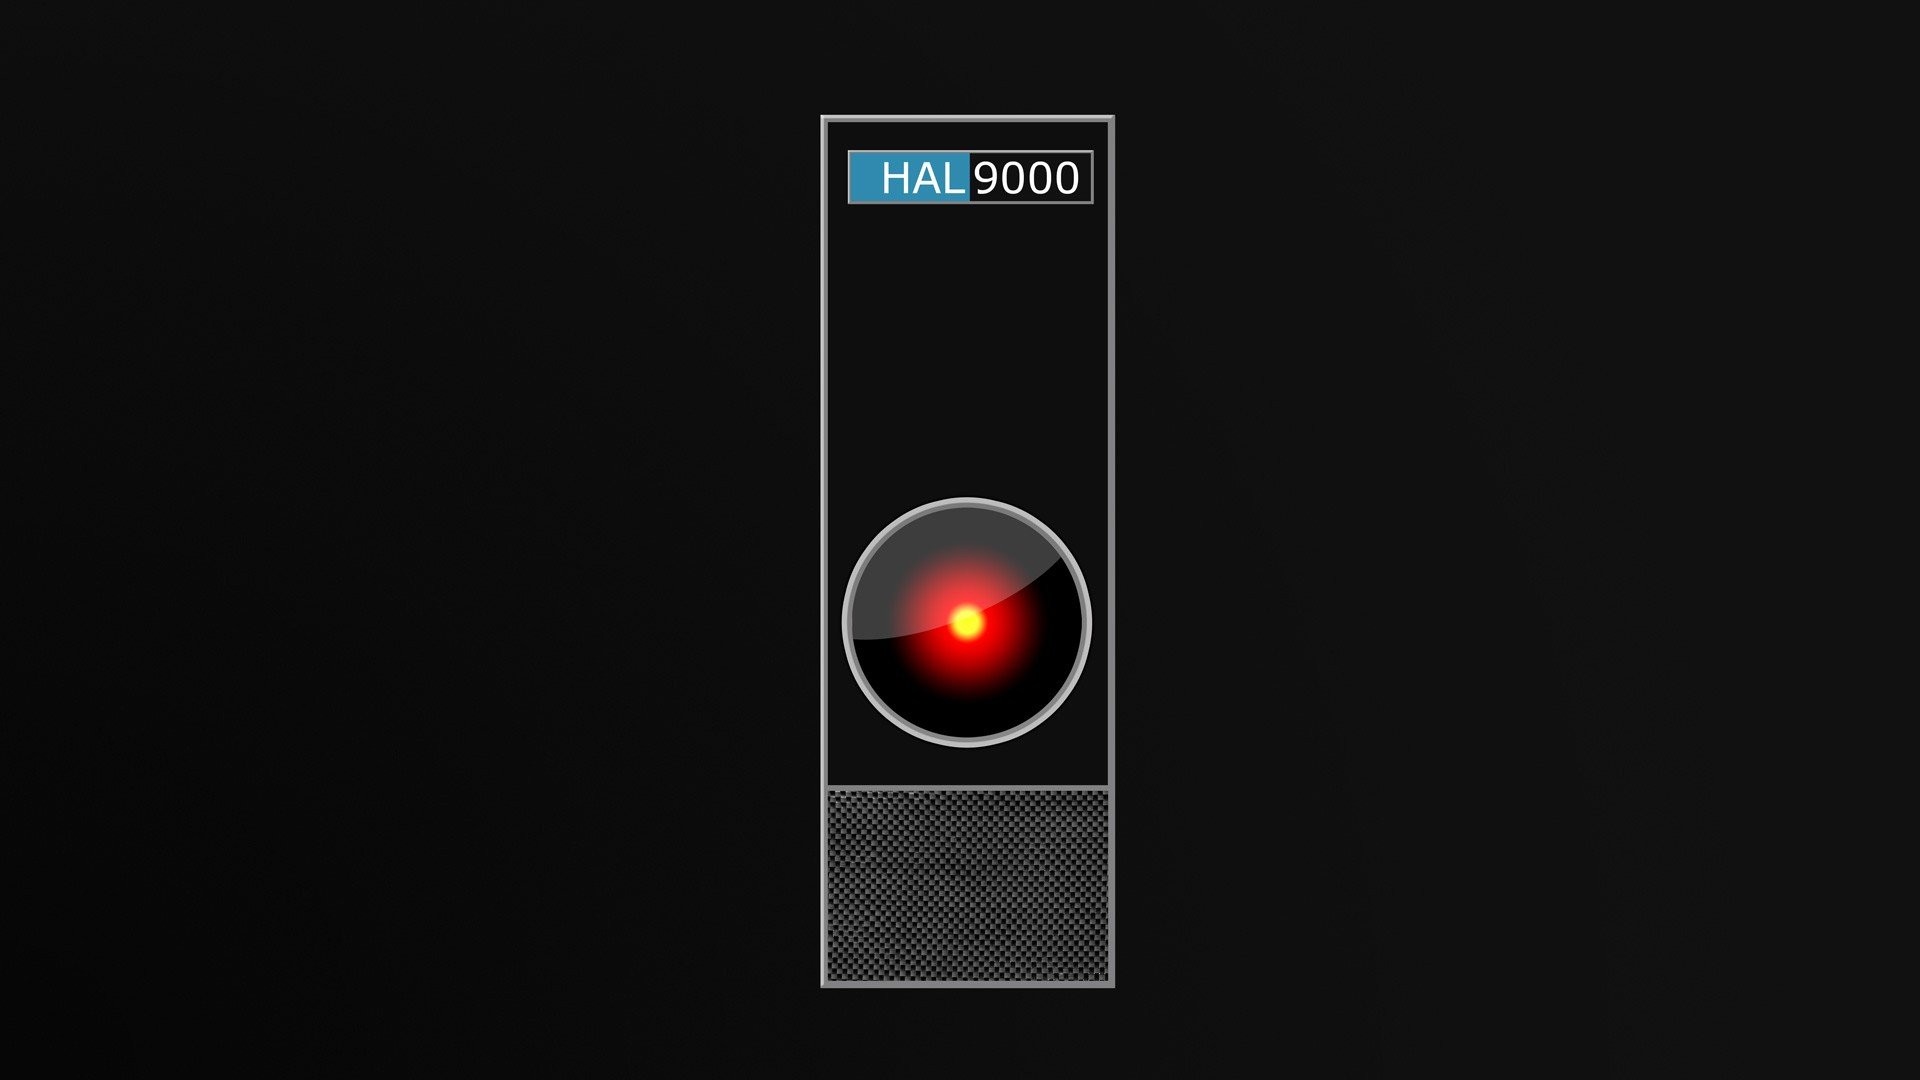 1920x1080 2001: A Space Odyssey HAL9000 Logic Memory Systems wallpaper |  |  313835 | WallpaperUP